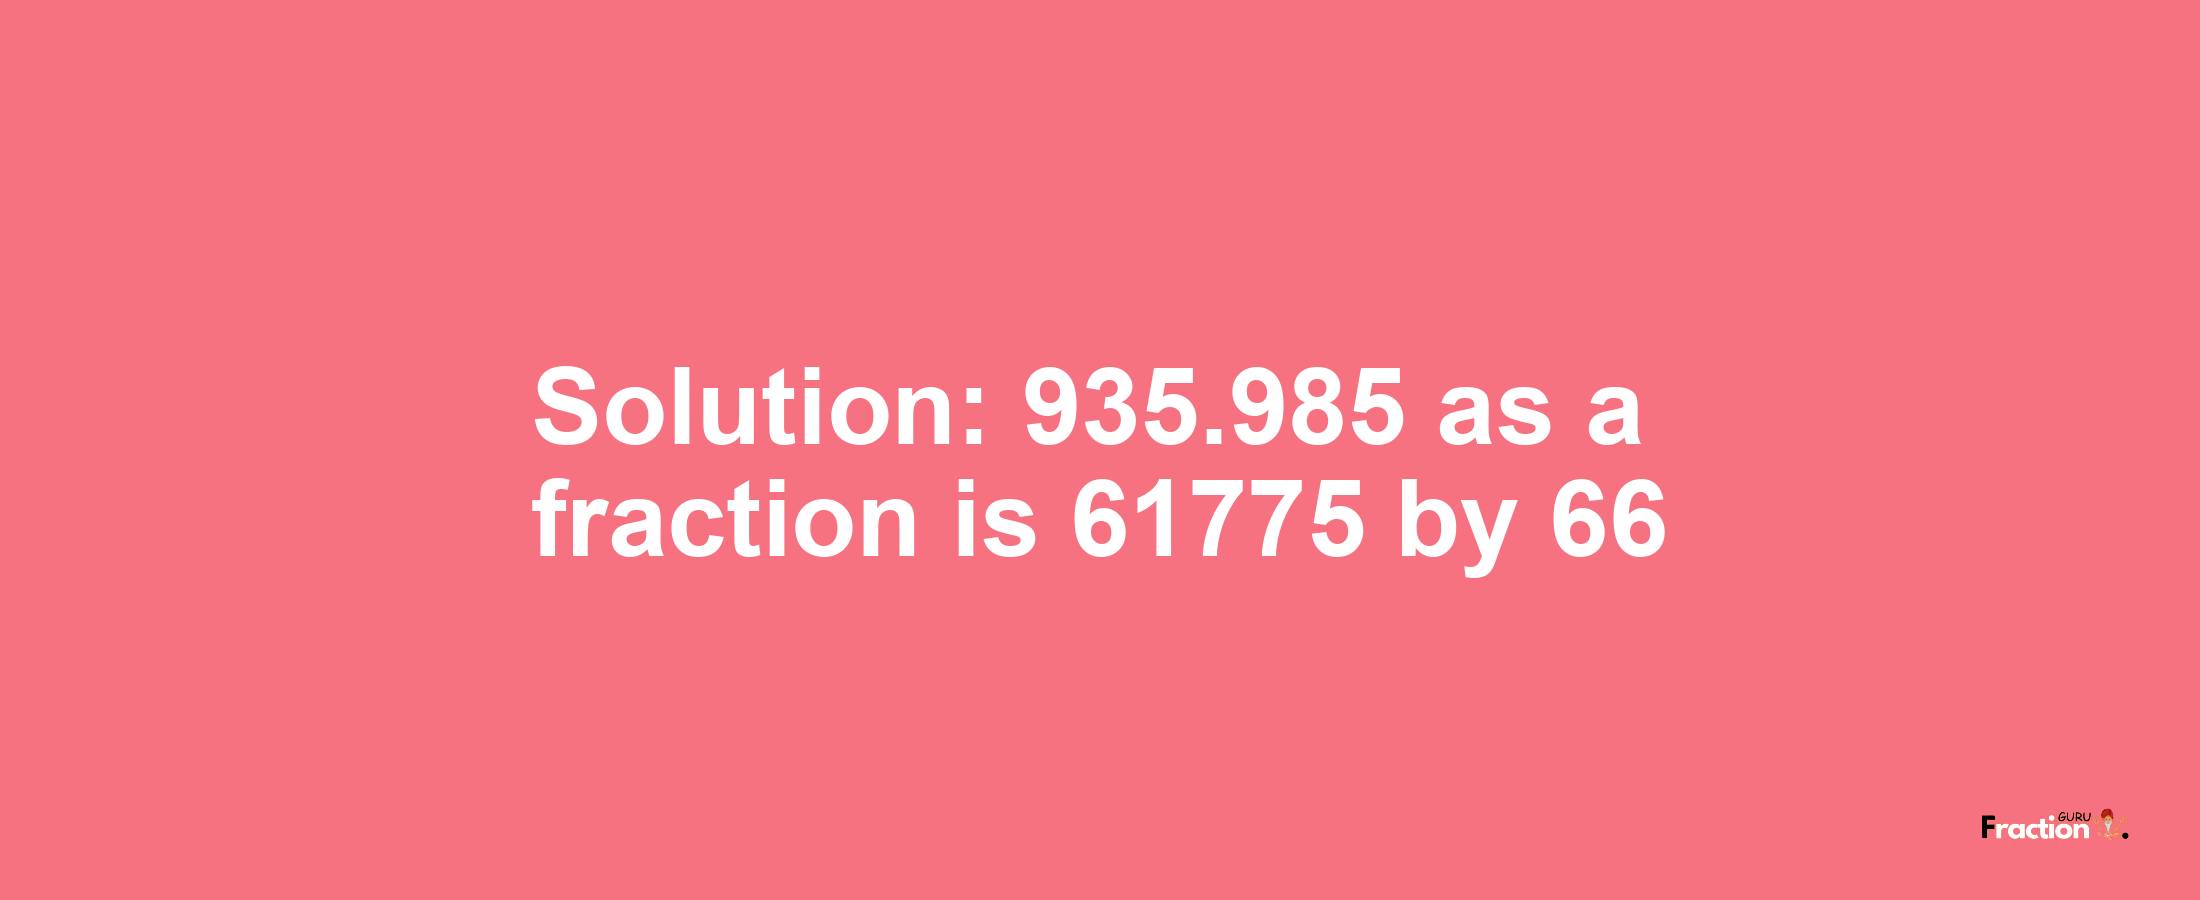 Solution:935.985 as a fraction is 61775/66